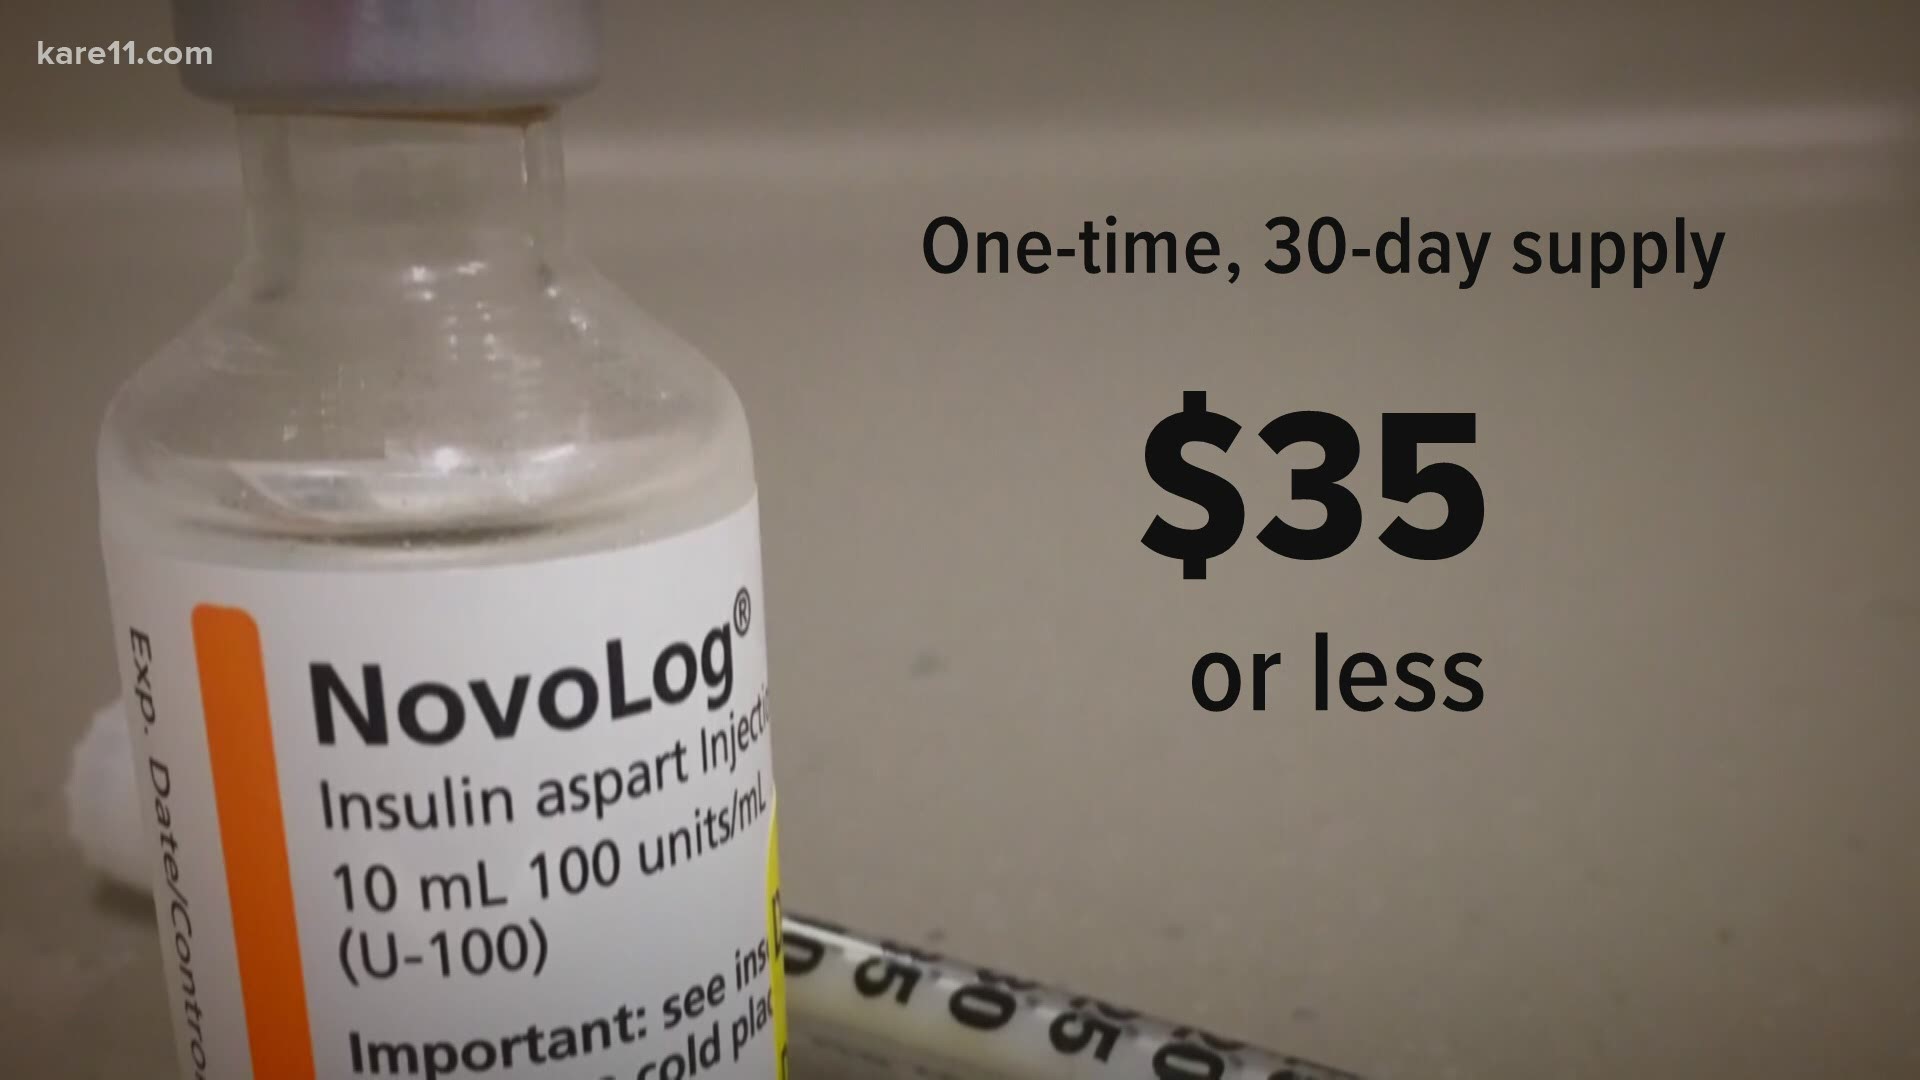 The Alec Smith Insulin Affordability Act is now law, but the fight over insulin costs may not be over.